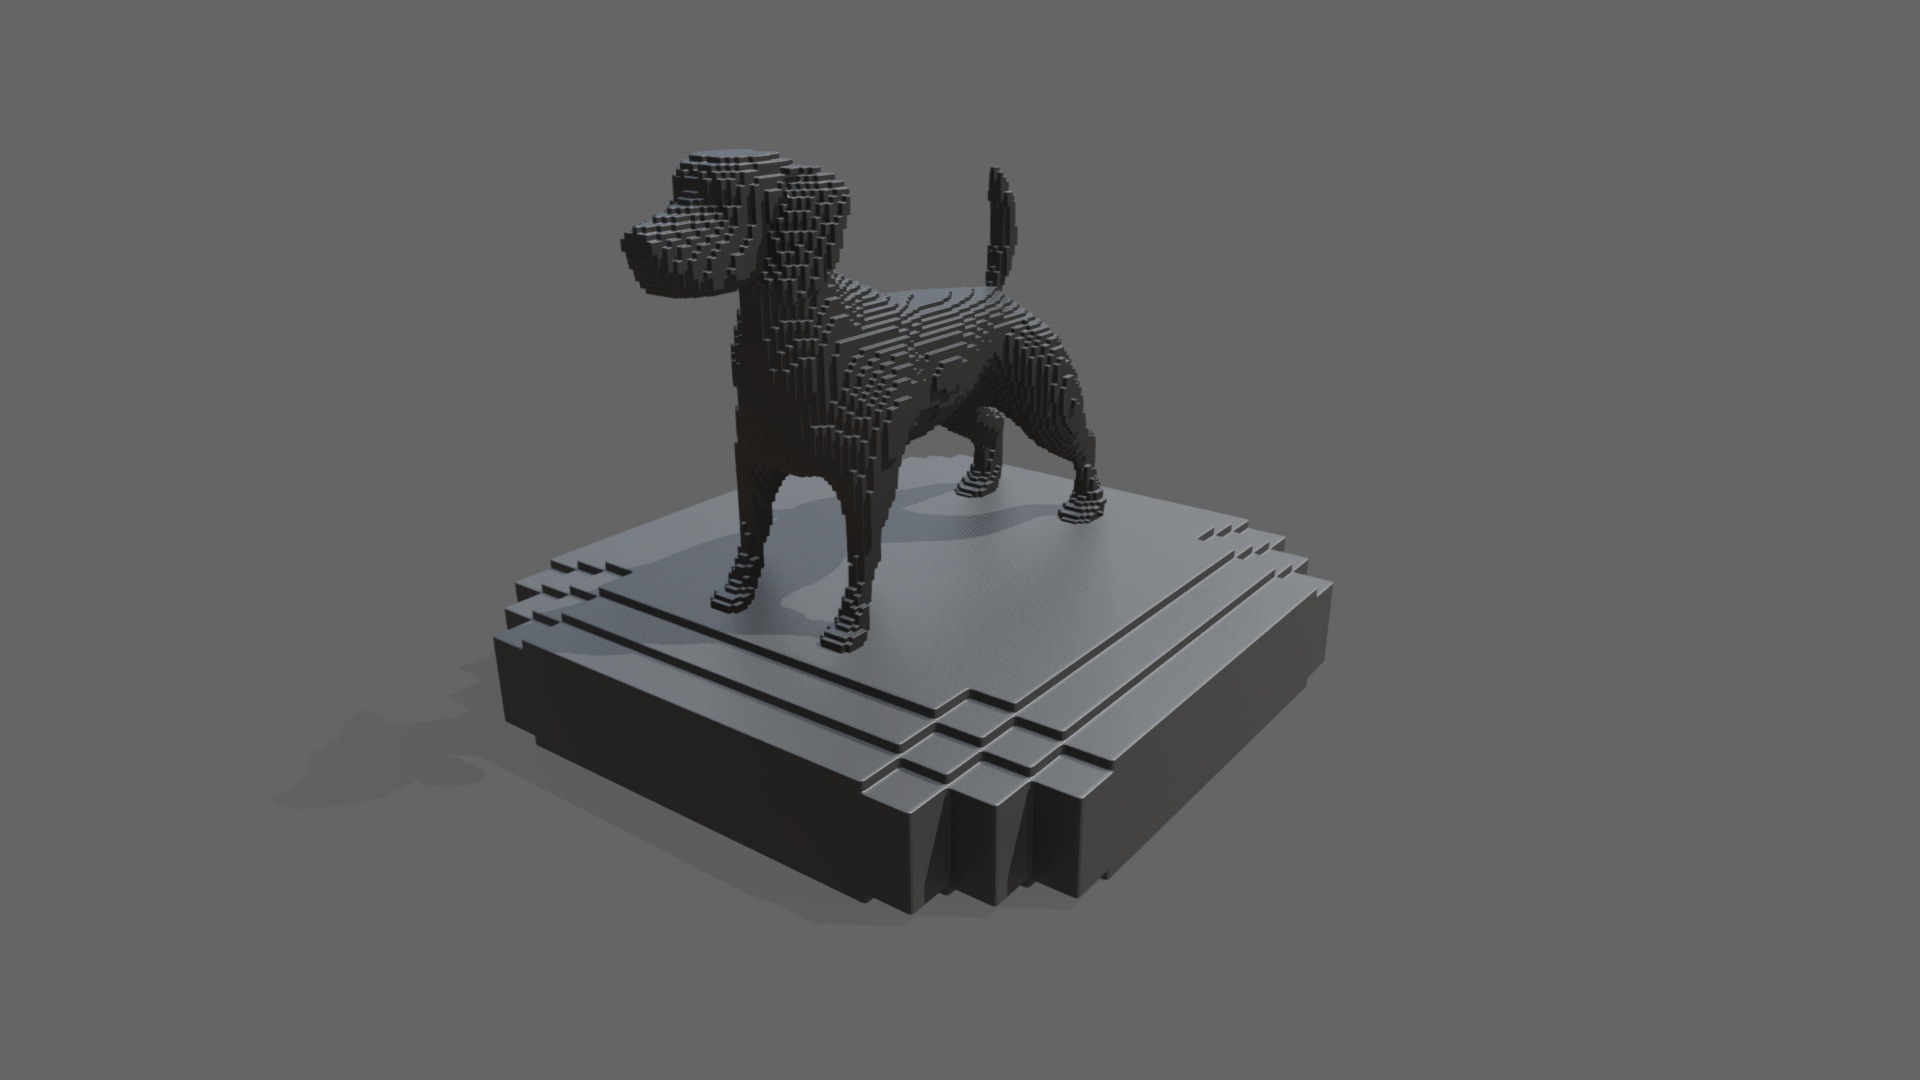 3D model doggy 3D Printing - This is a 3D model of the doggy 3D Printing. The 3D model is about a model of a tiger.